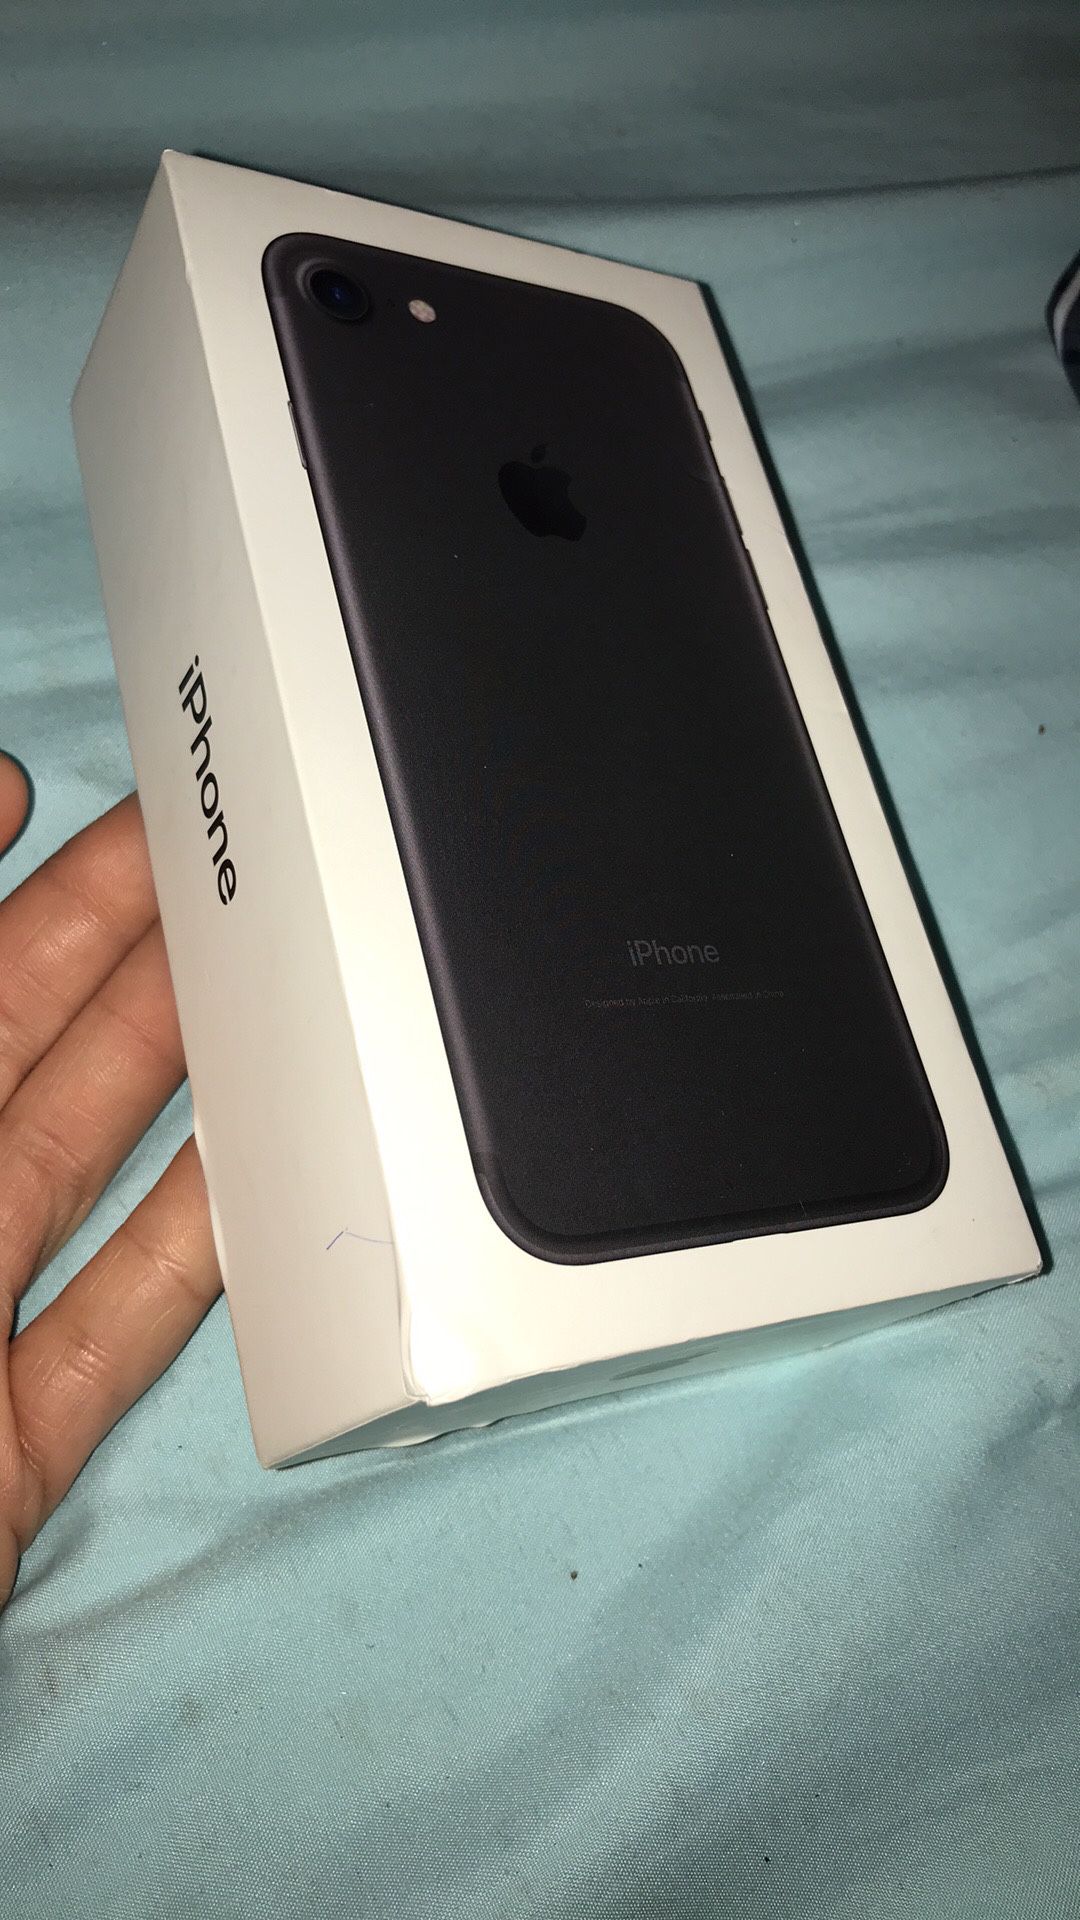 BOOST IPhone 7 NEW IN BOX